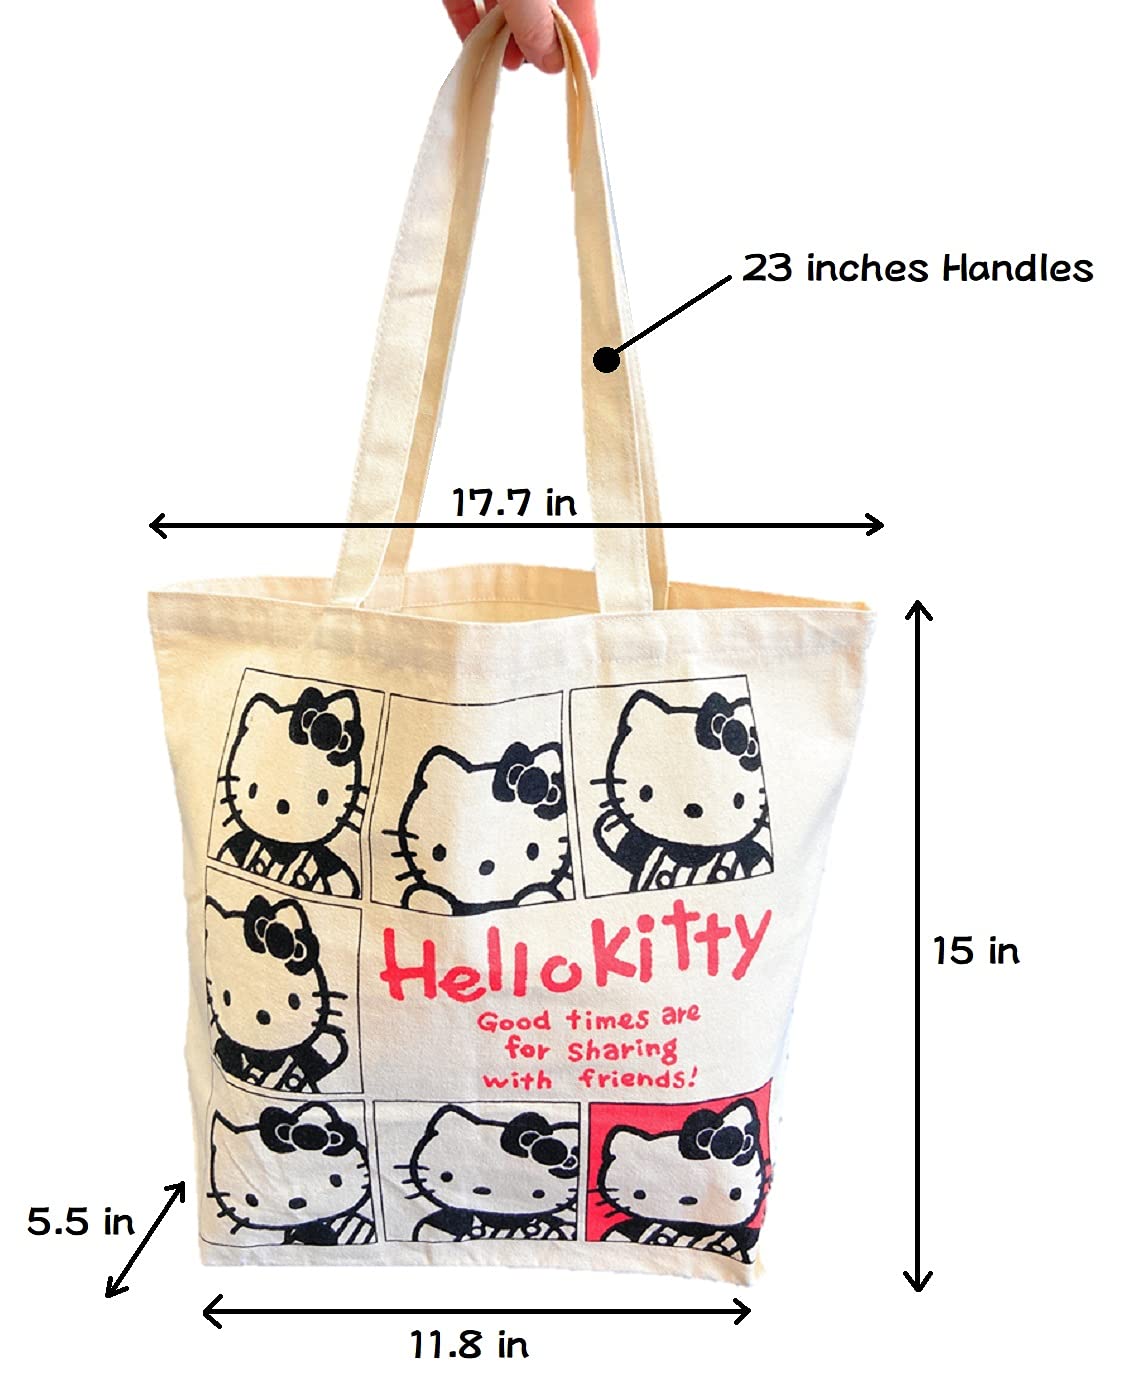 Friend Sanrio Hello Kitty Cute Tote Bag, Shopping Bag, Gym Bag, Kitchen Reusable Grocery Bag, Japan Quality and Japan Technology surpervised by EITAI Japan, 15 in(H) x 11.8 in(L) x 5.5 in(W)